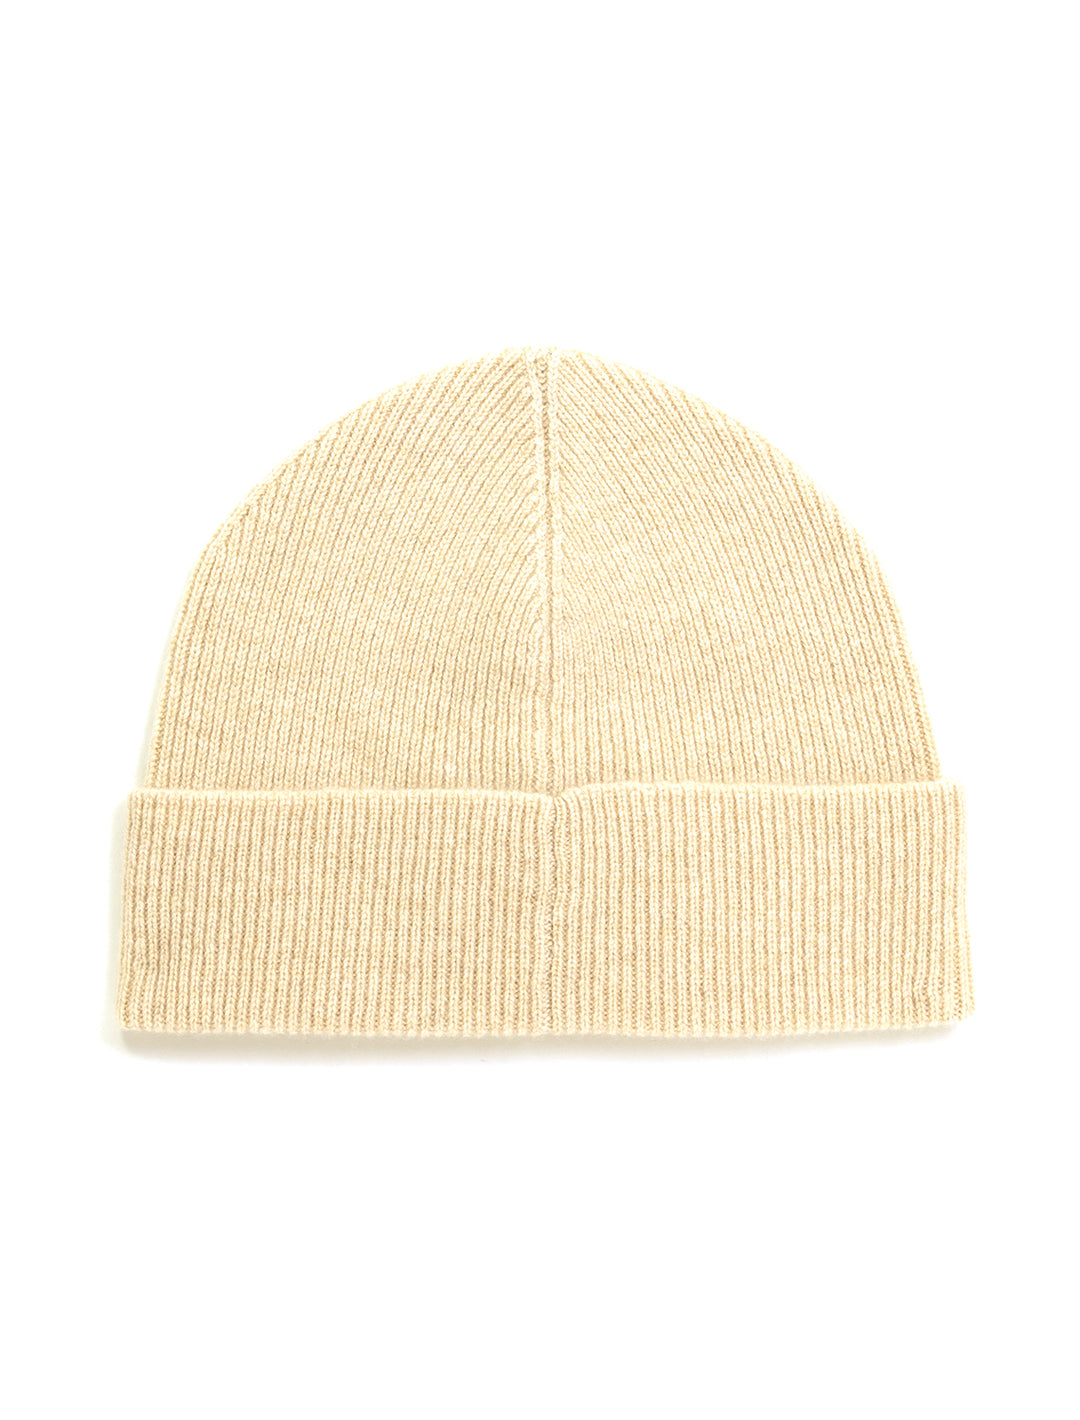 Front view of Jumper 1234's ribbed turnback hat in oatmeal.